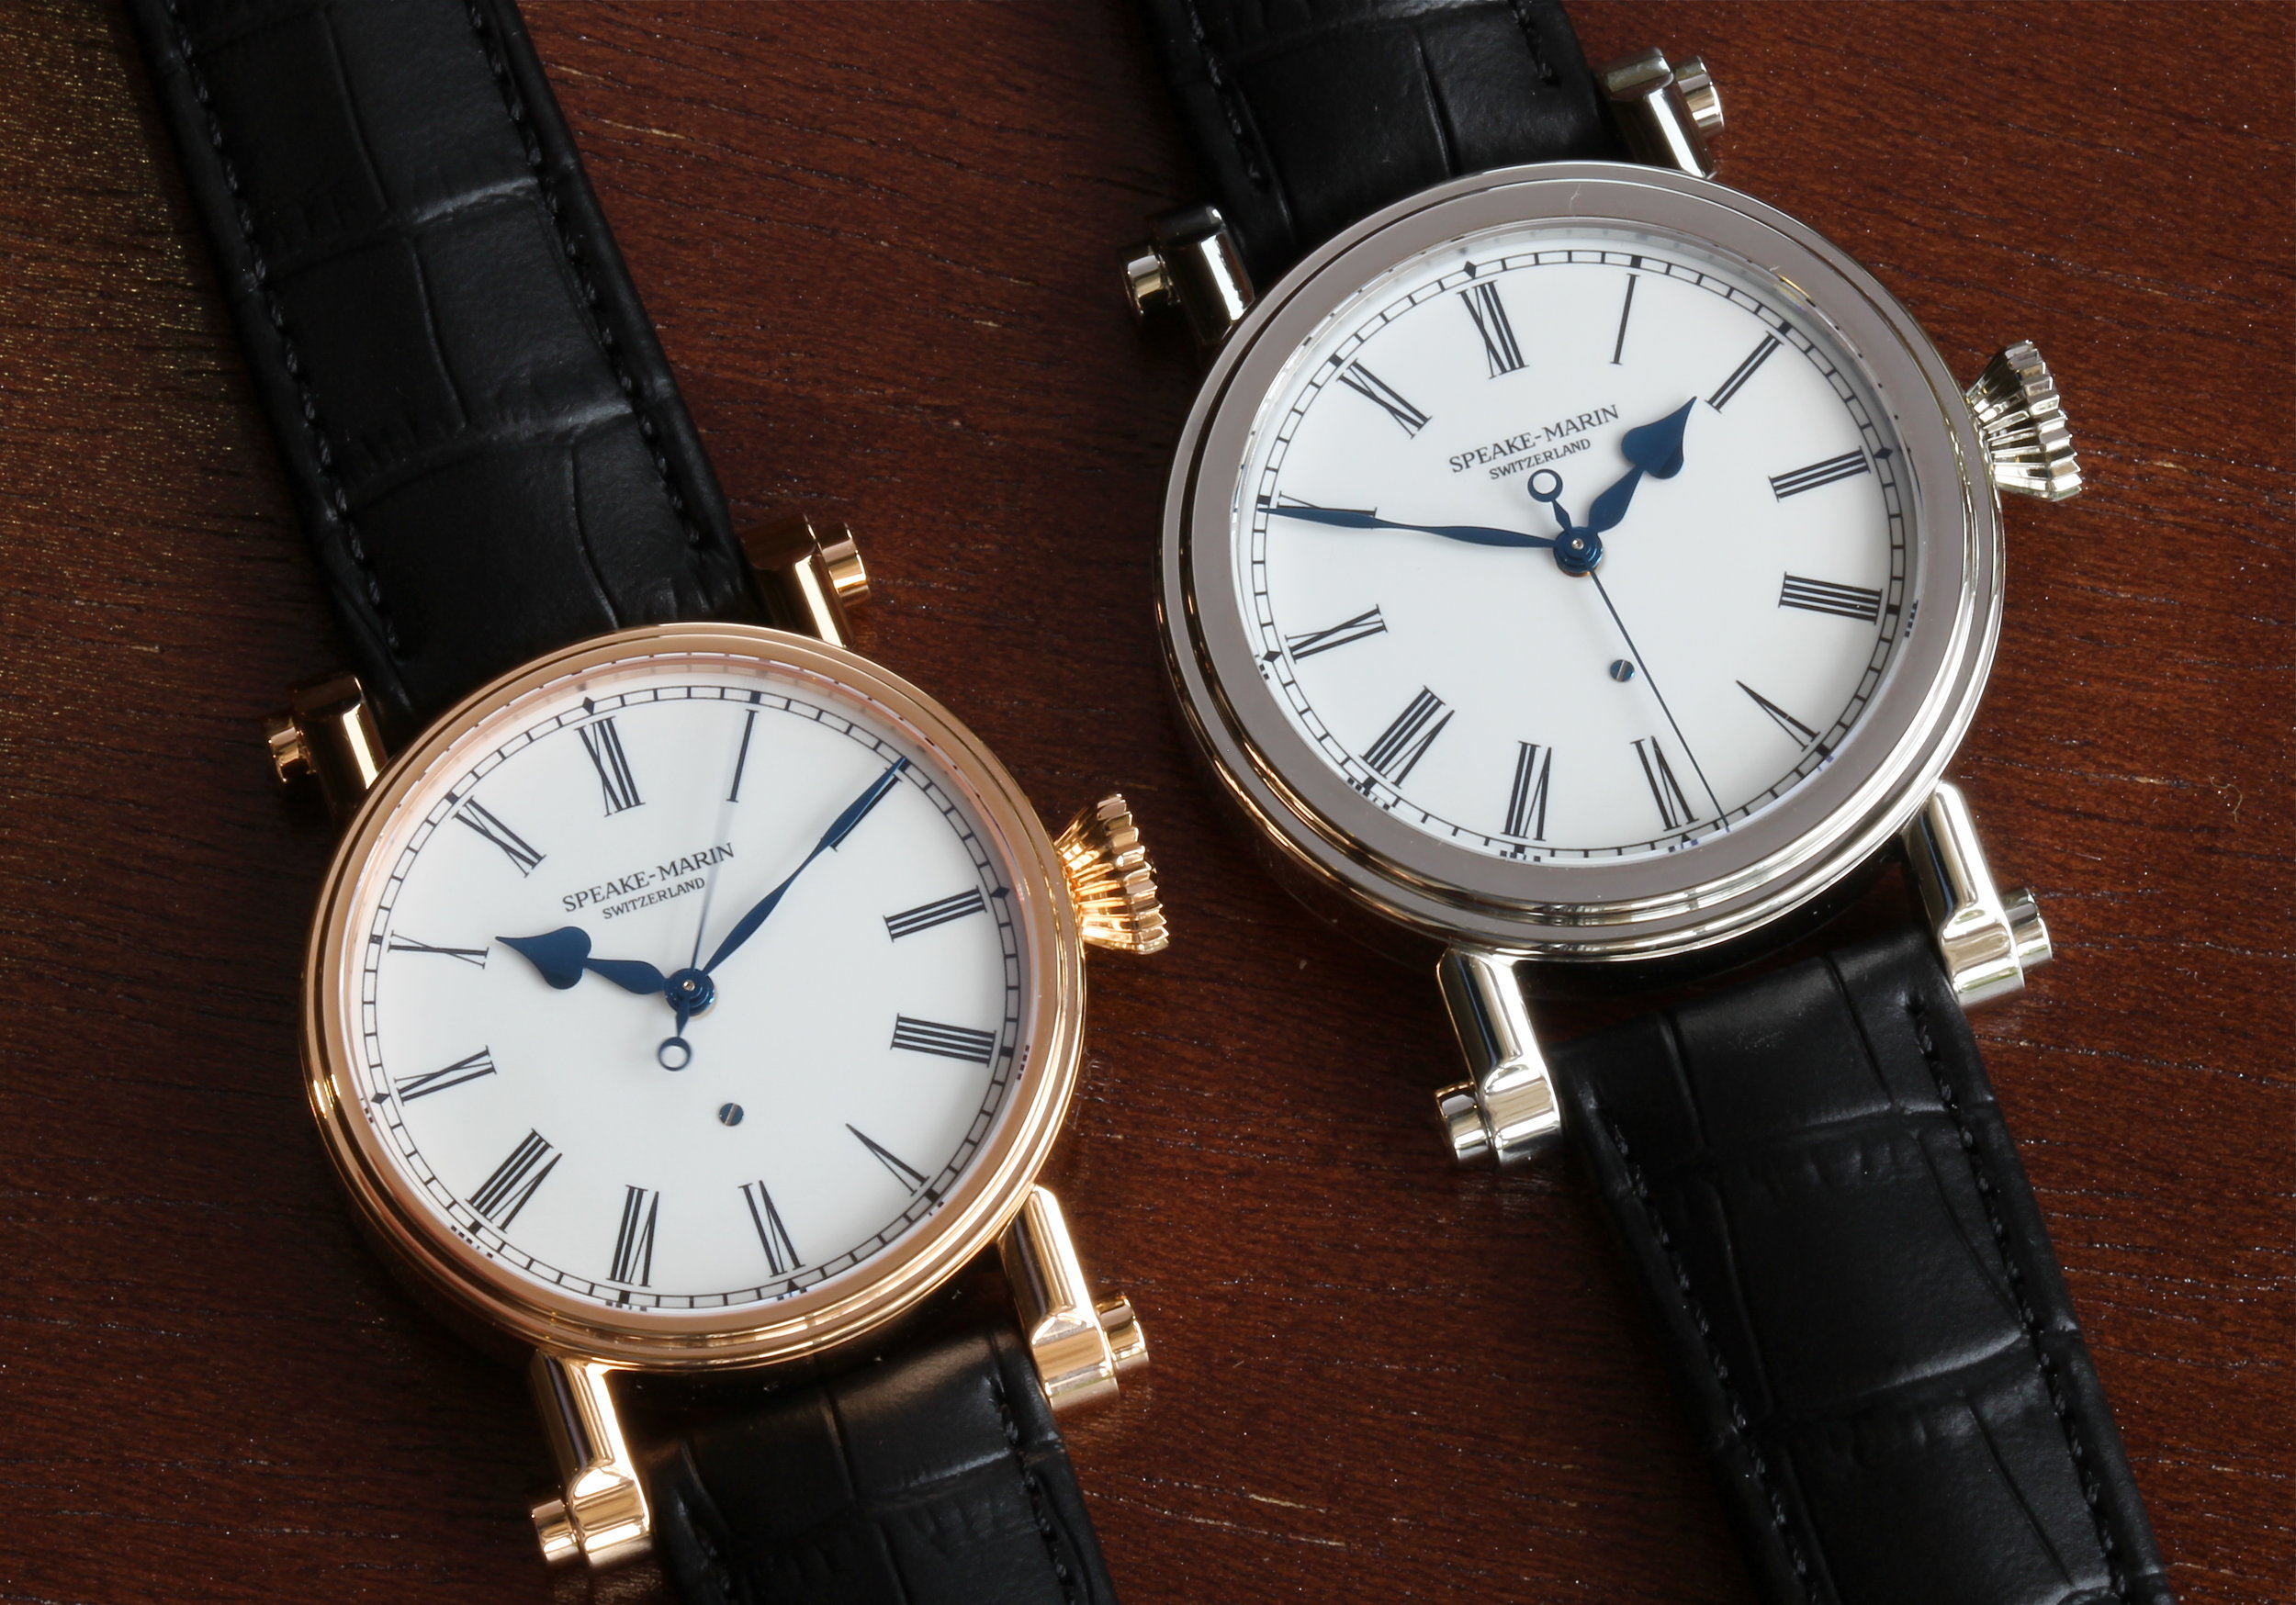 A pair of Speake-Marin Piccadilly Resilience models